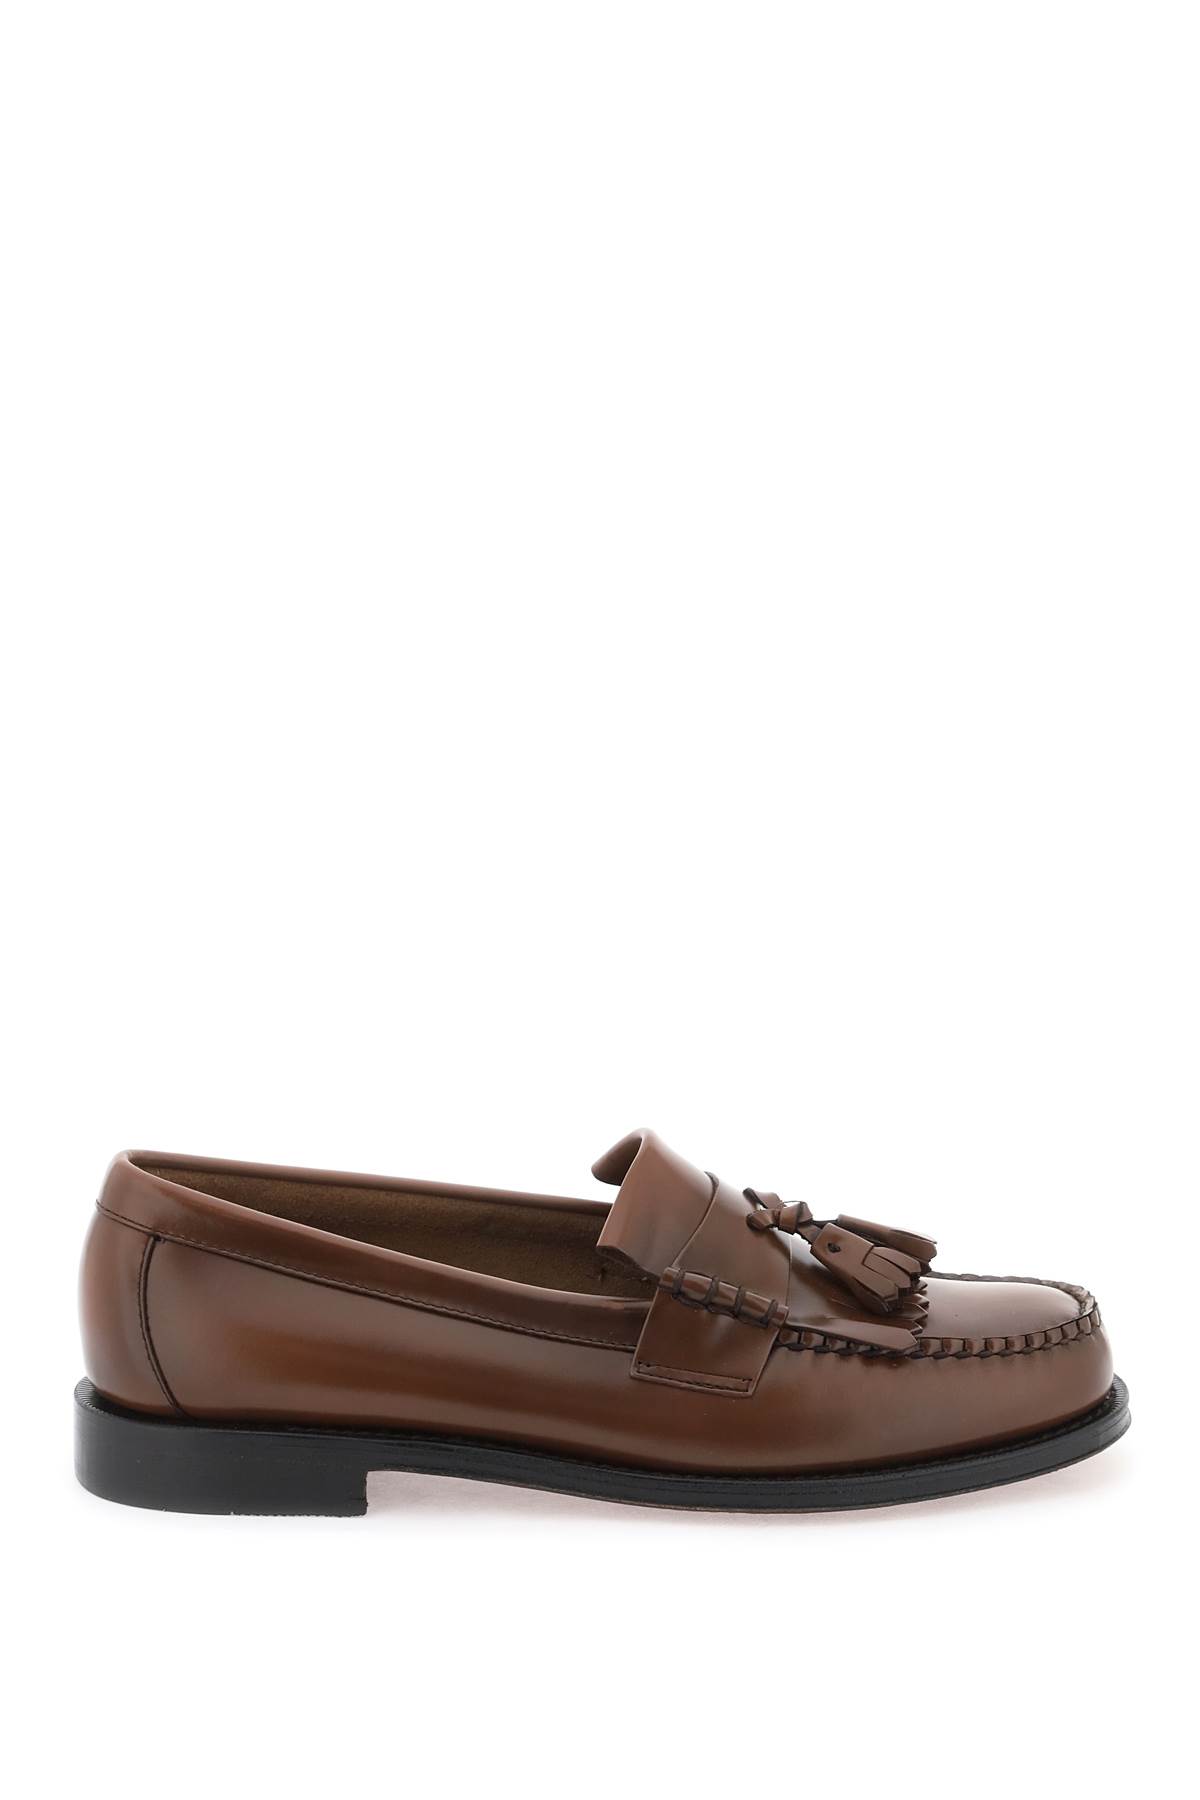 G.H.Bass & Co. Esther Kiltie Weejuns Loafers